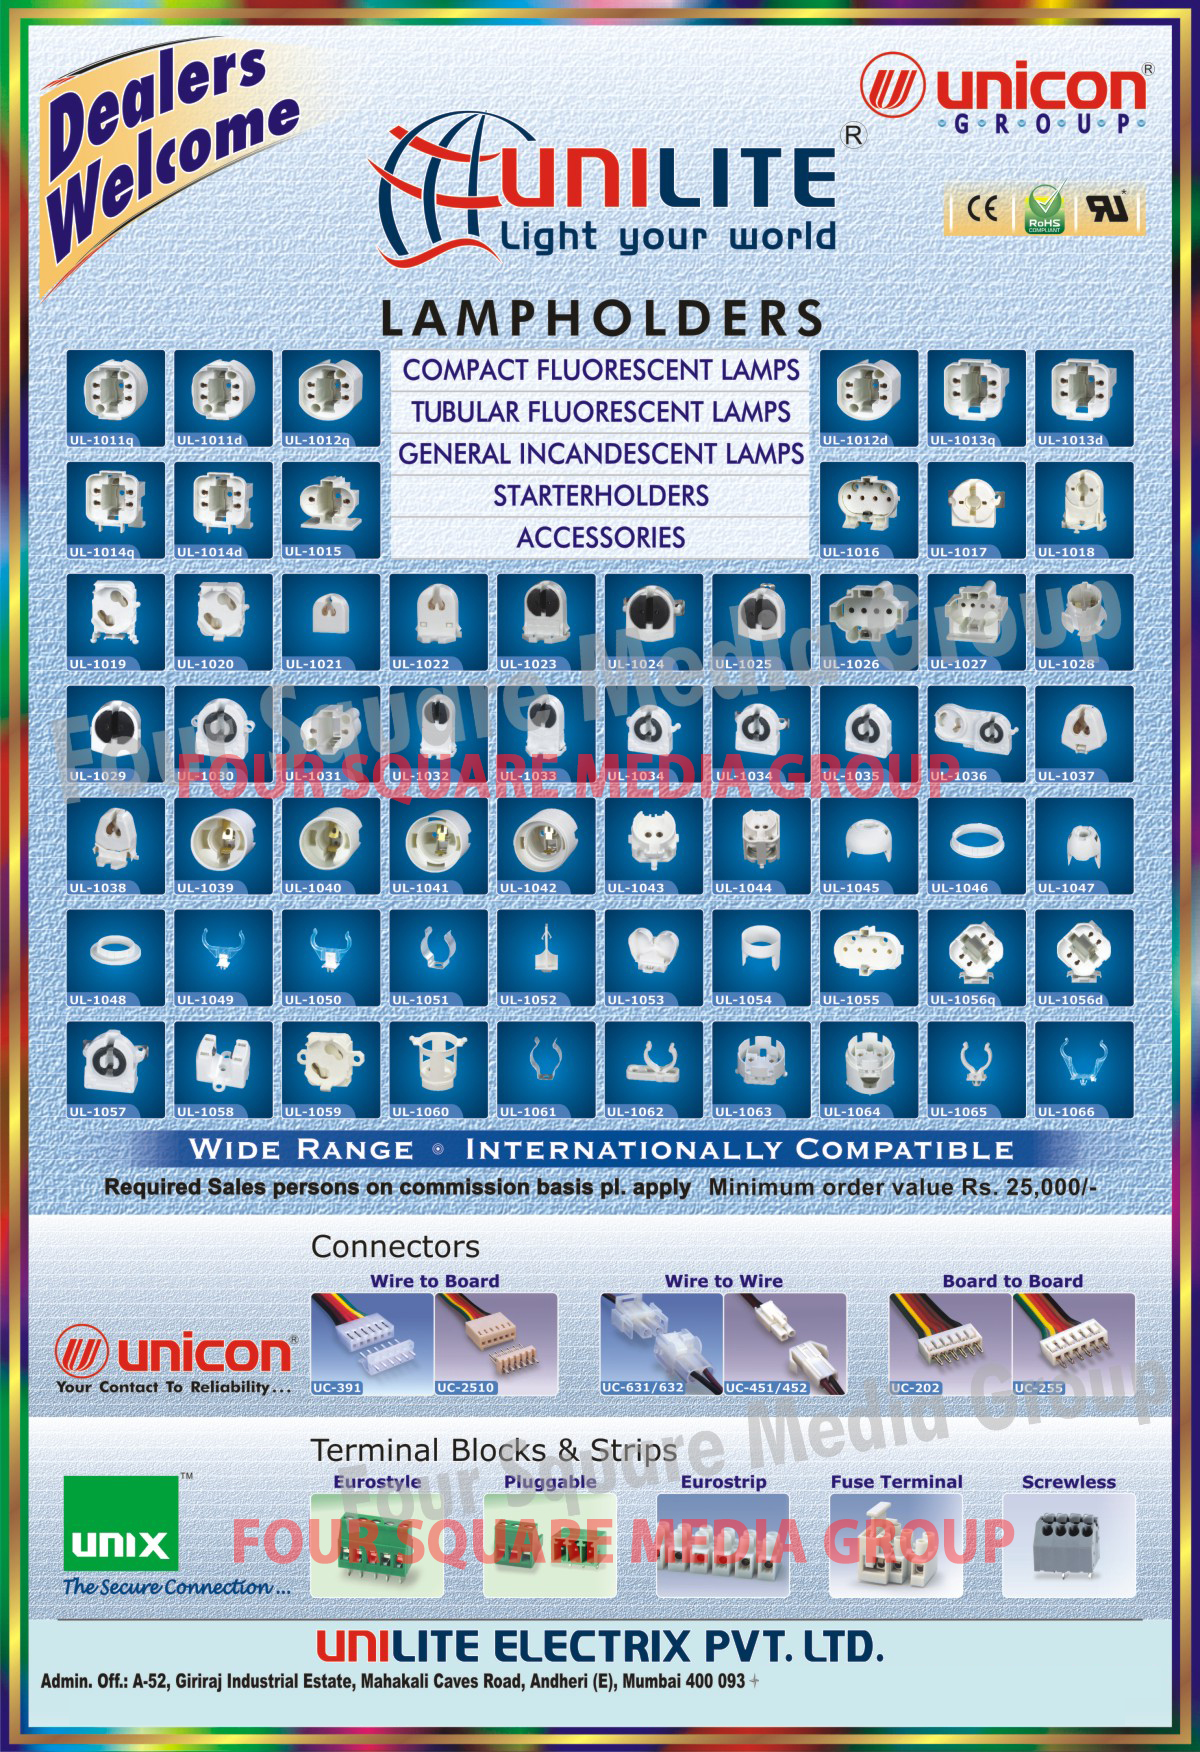 CFL Lamp Holders, Tubular Fluorescent Lamp Holders, General Incandescent Lamp Holders, Starter Holders, Connectors, Terminal Blocks, Terminal Strips, Fuse Terminals, Electrical Accessories